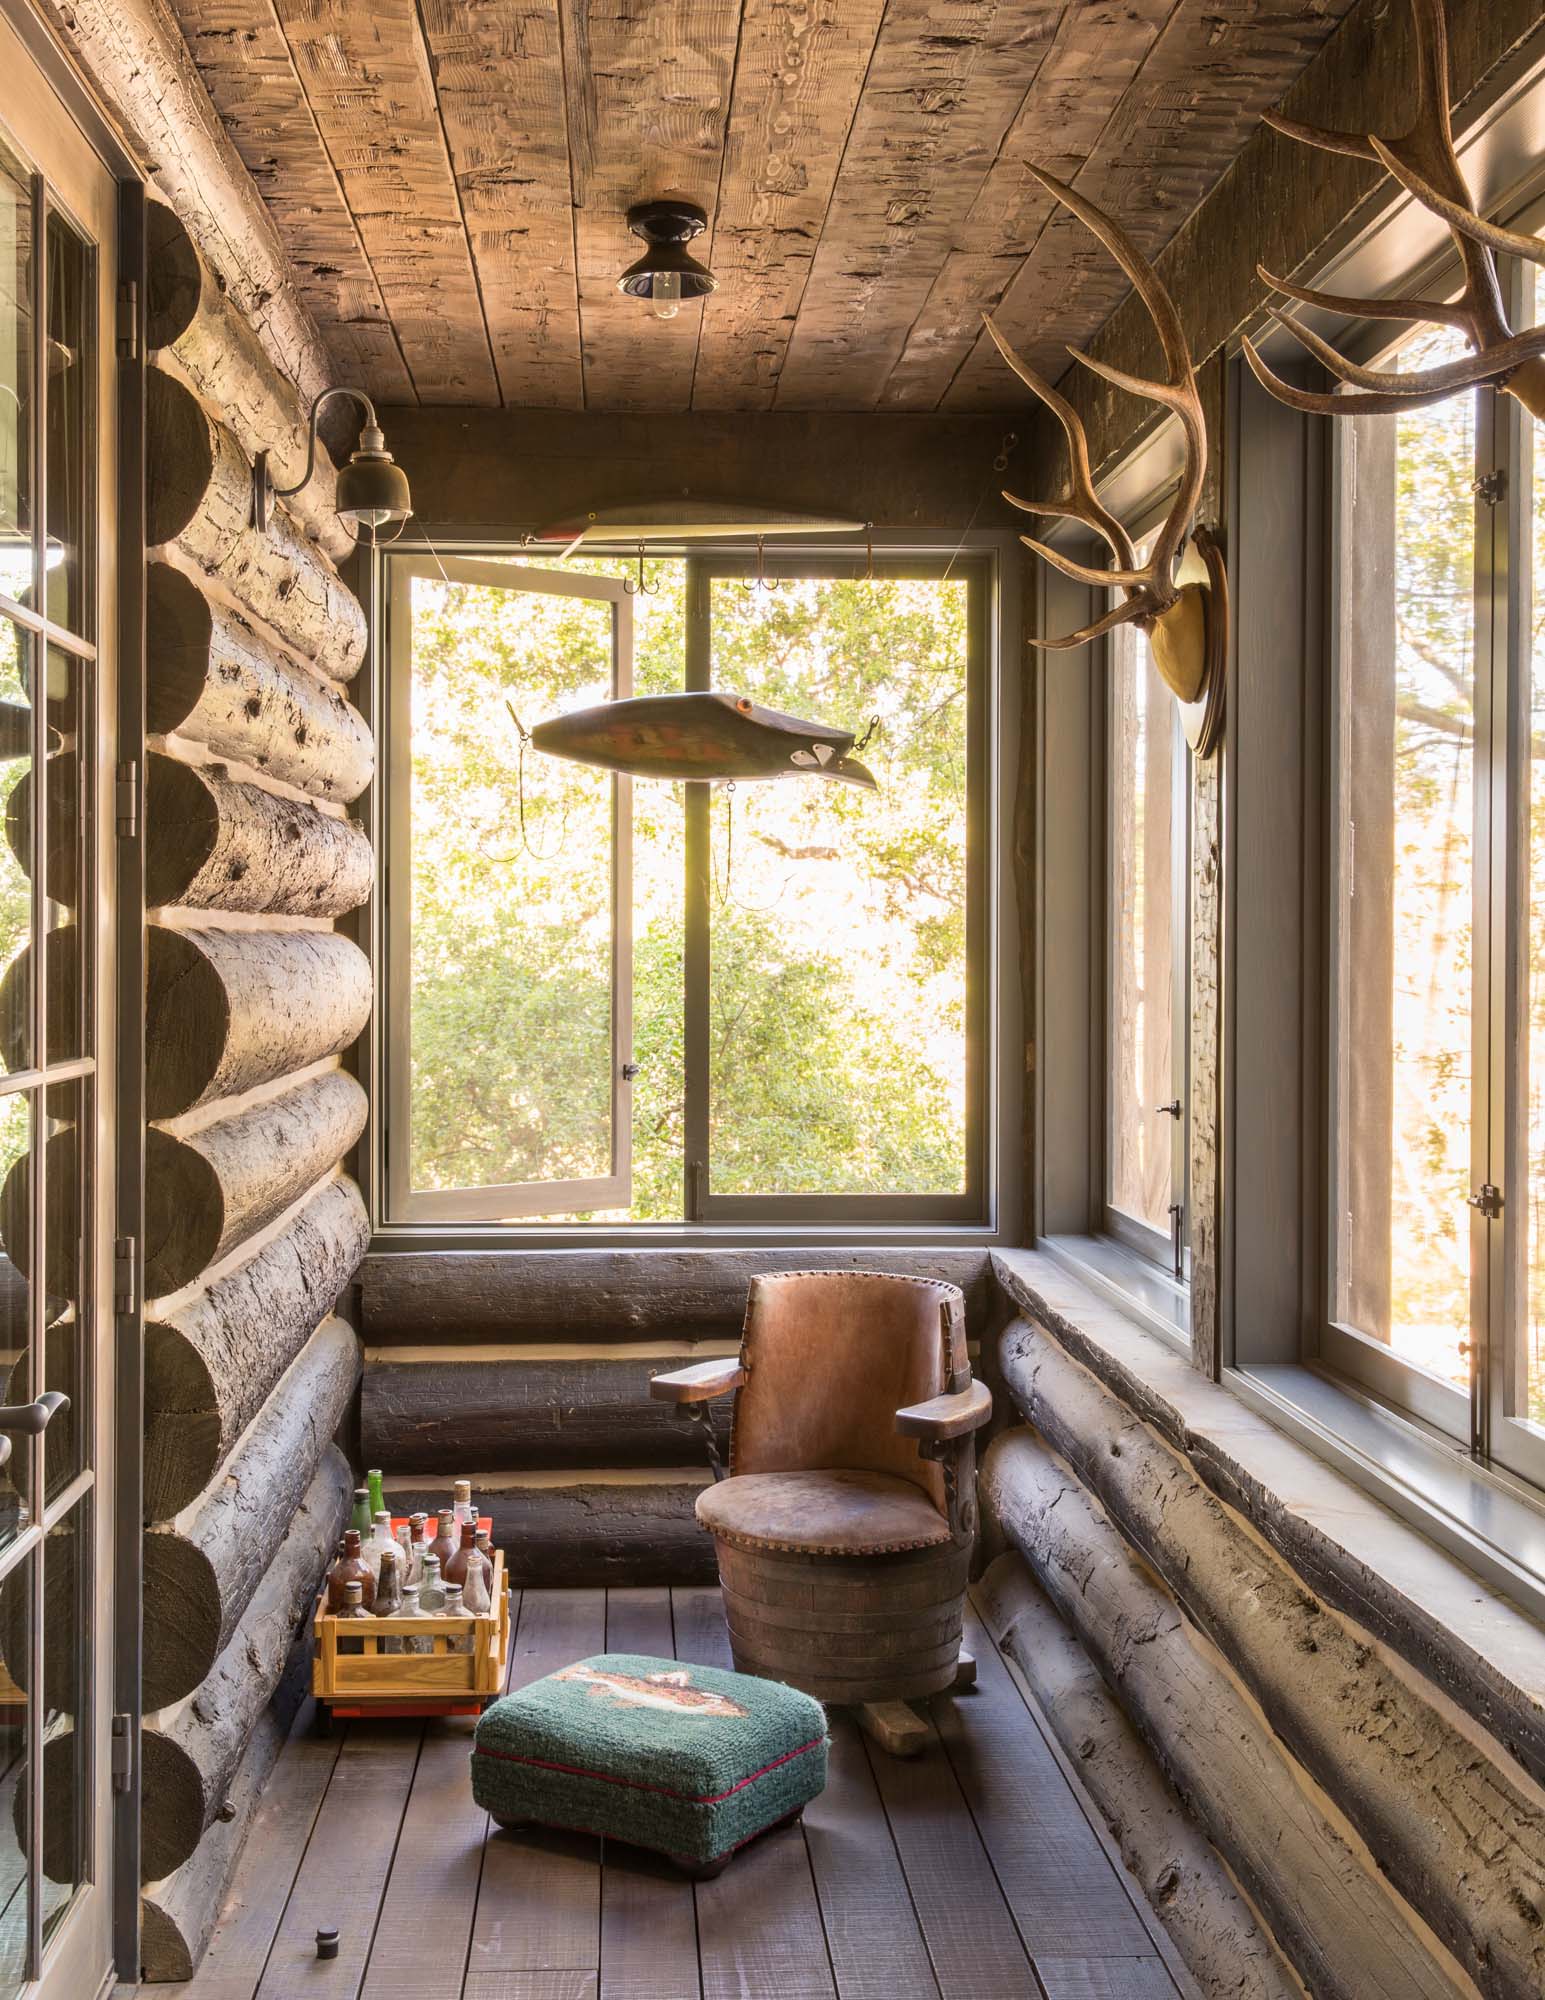  The Butler home in Rustic Canyon.  Consturction by Eric Dobkin, interior design by Lisa Strong. 